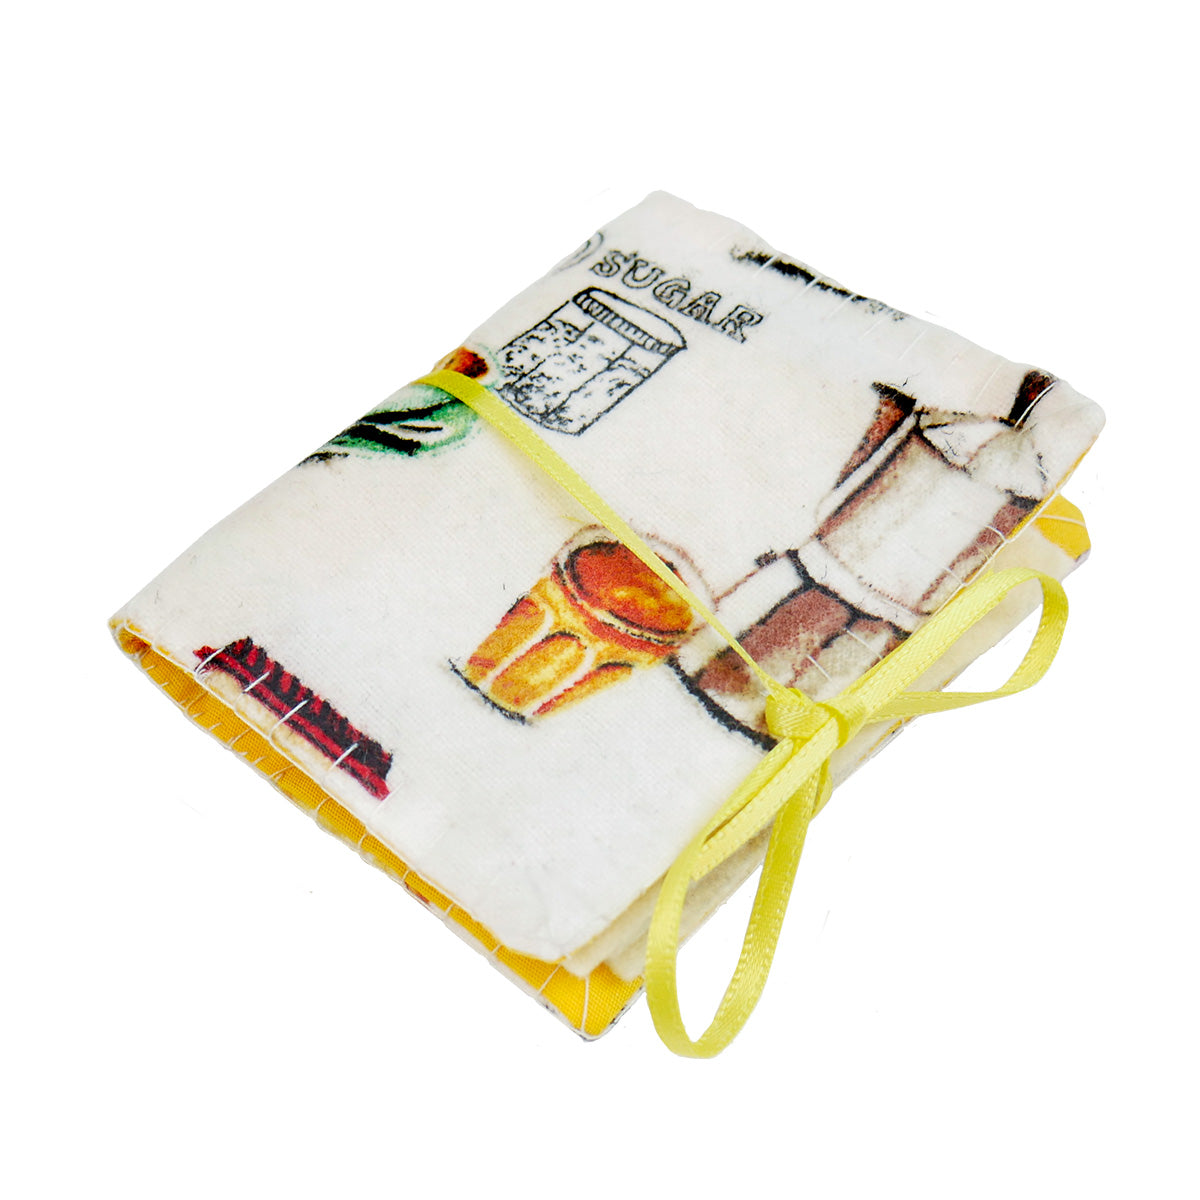 A single completed Needle Book with a cafe latte patterned fabric on the outside, white felt pages on the inside, and a thin yellow ribbon tying it closed around with a bow.